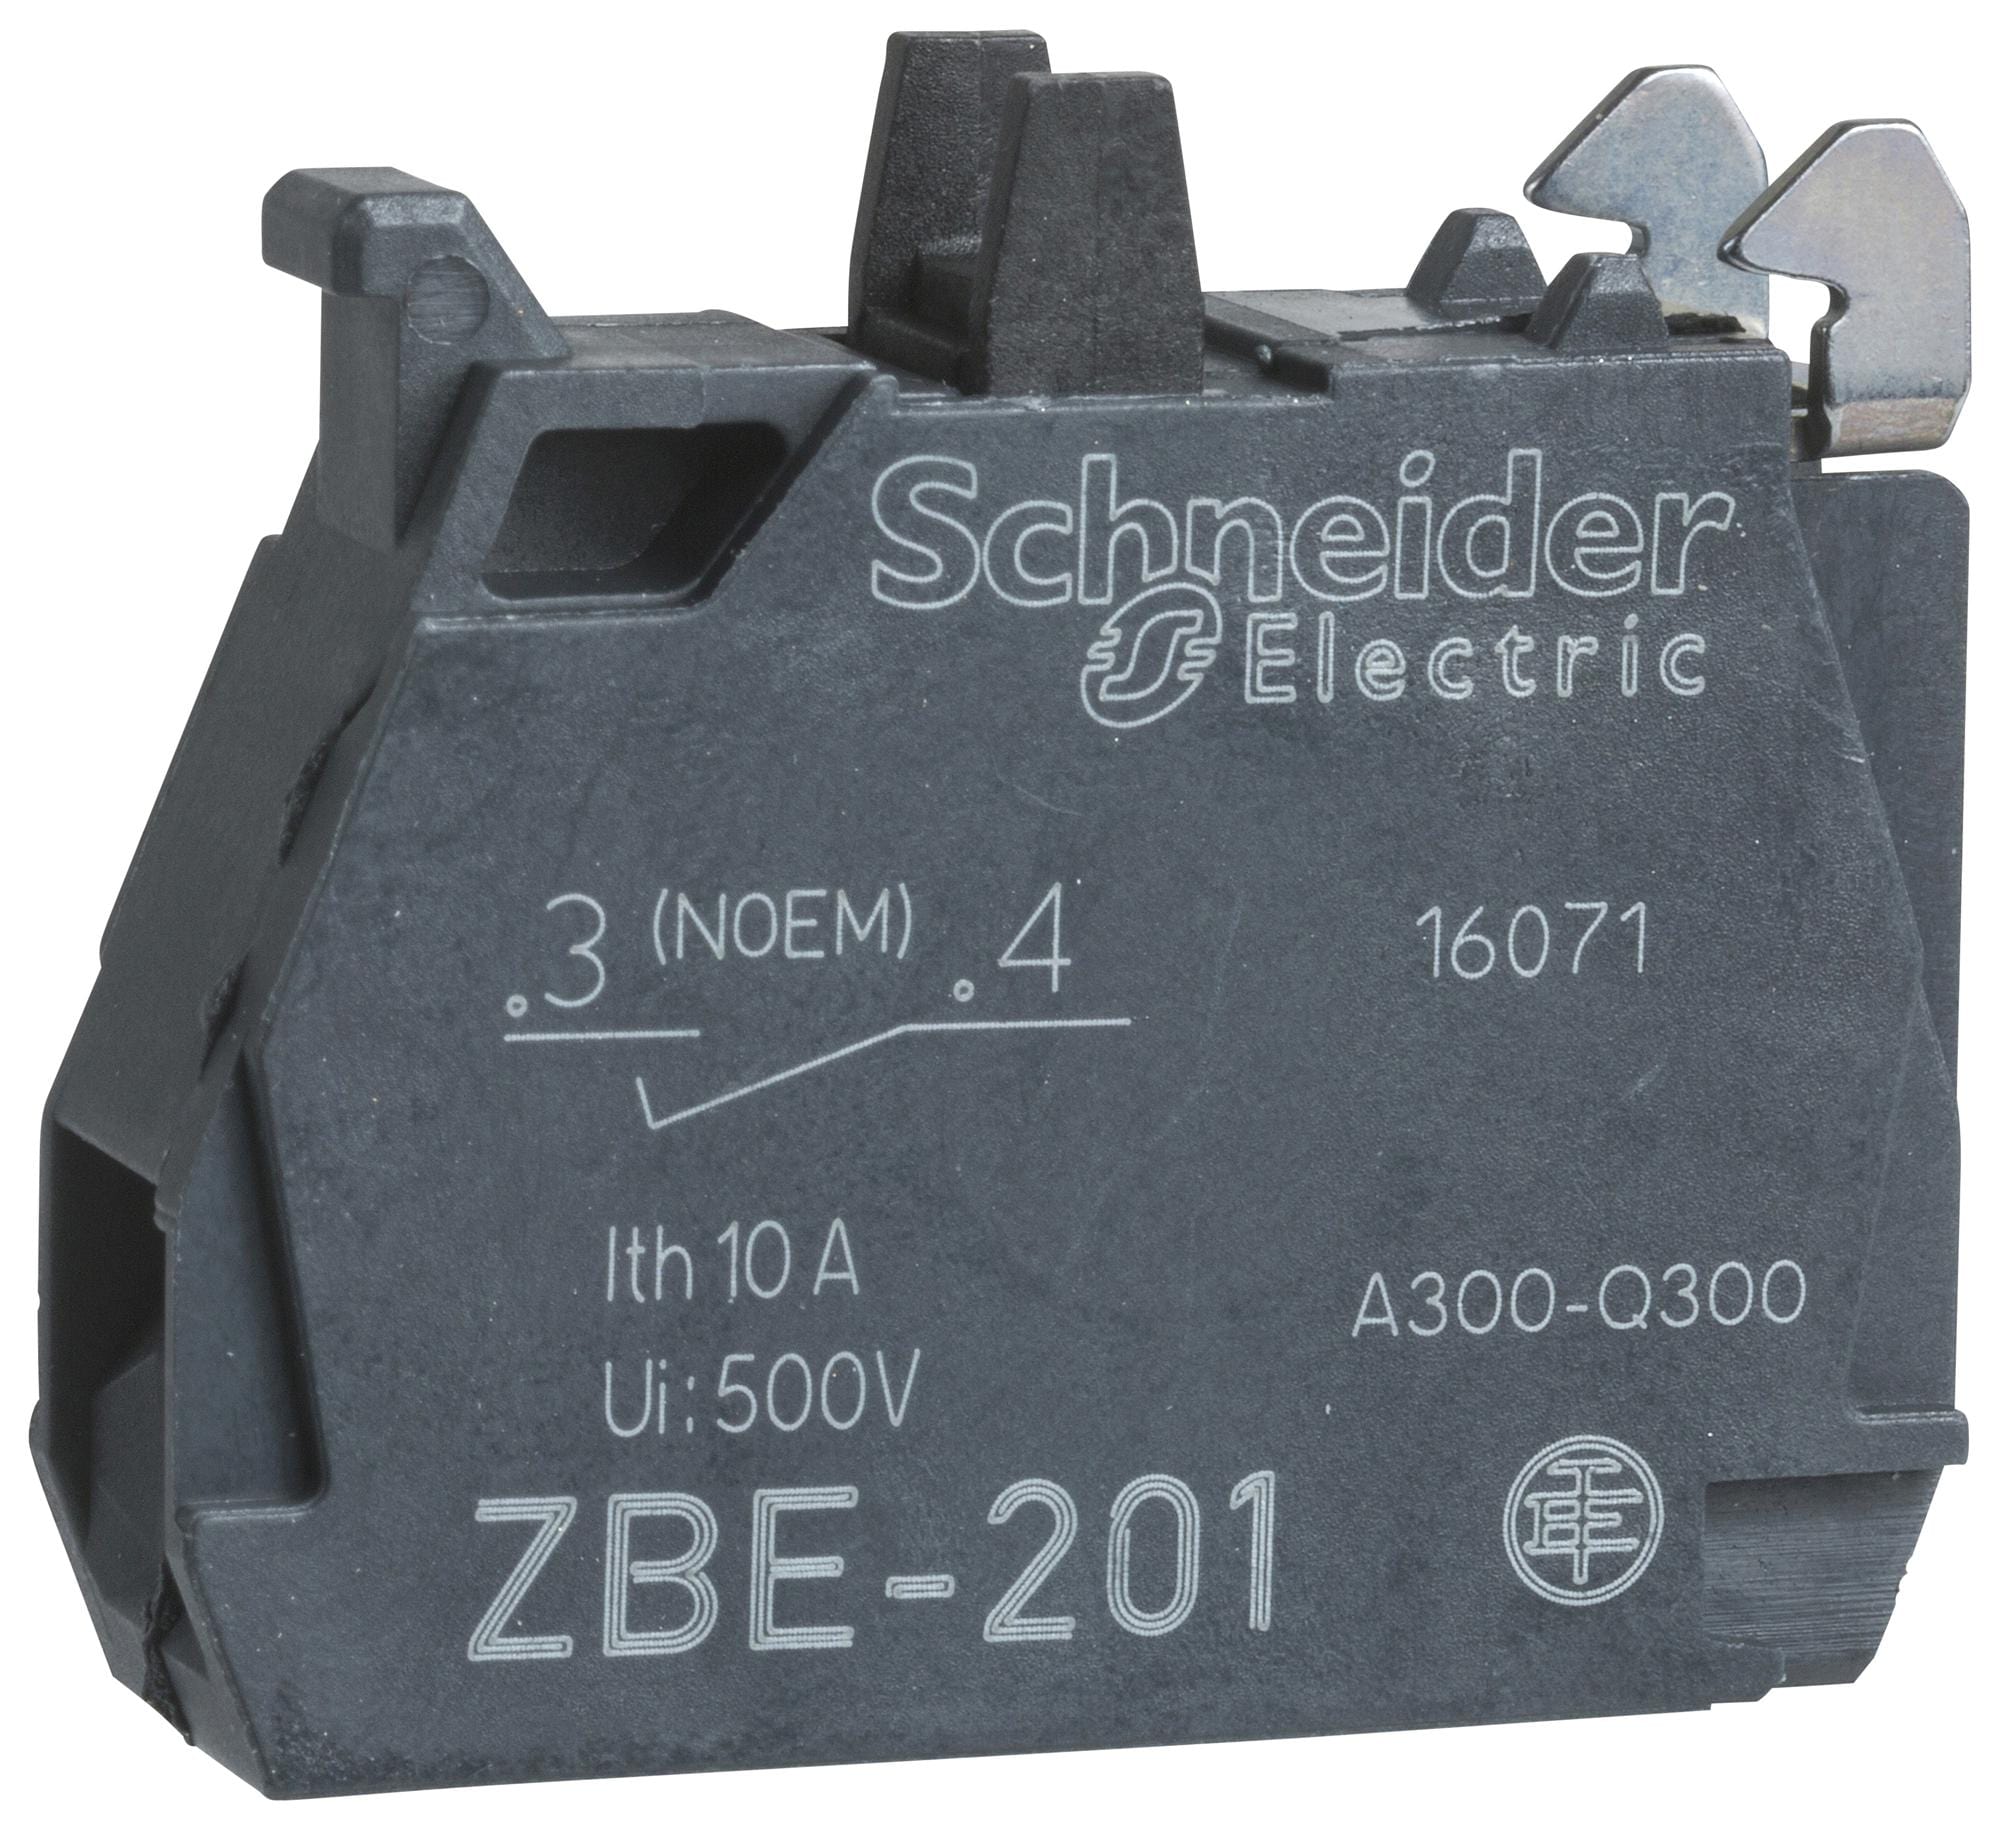 SCHNEIDER ELECTRIC Contact Blocks ZBE1019 CONTACT BLOCK, 1POLE, SCREW SCHNEIDER ELECTRIC 3114917 ZBE1019